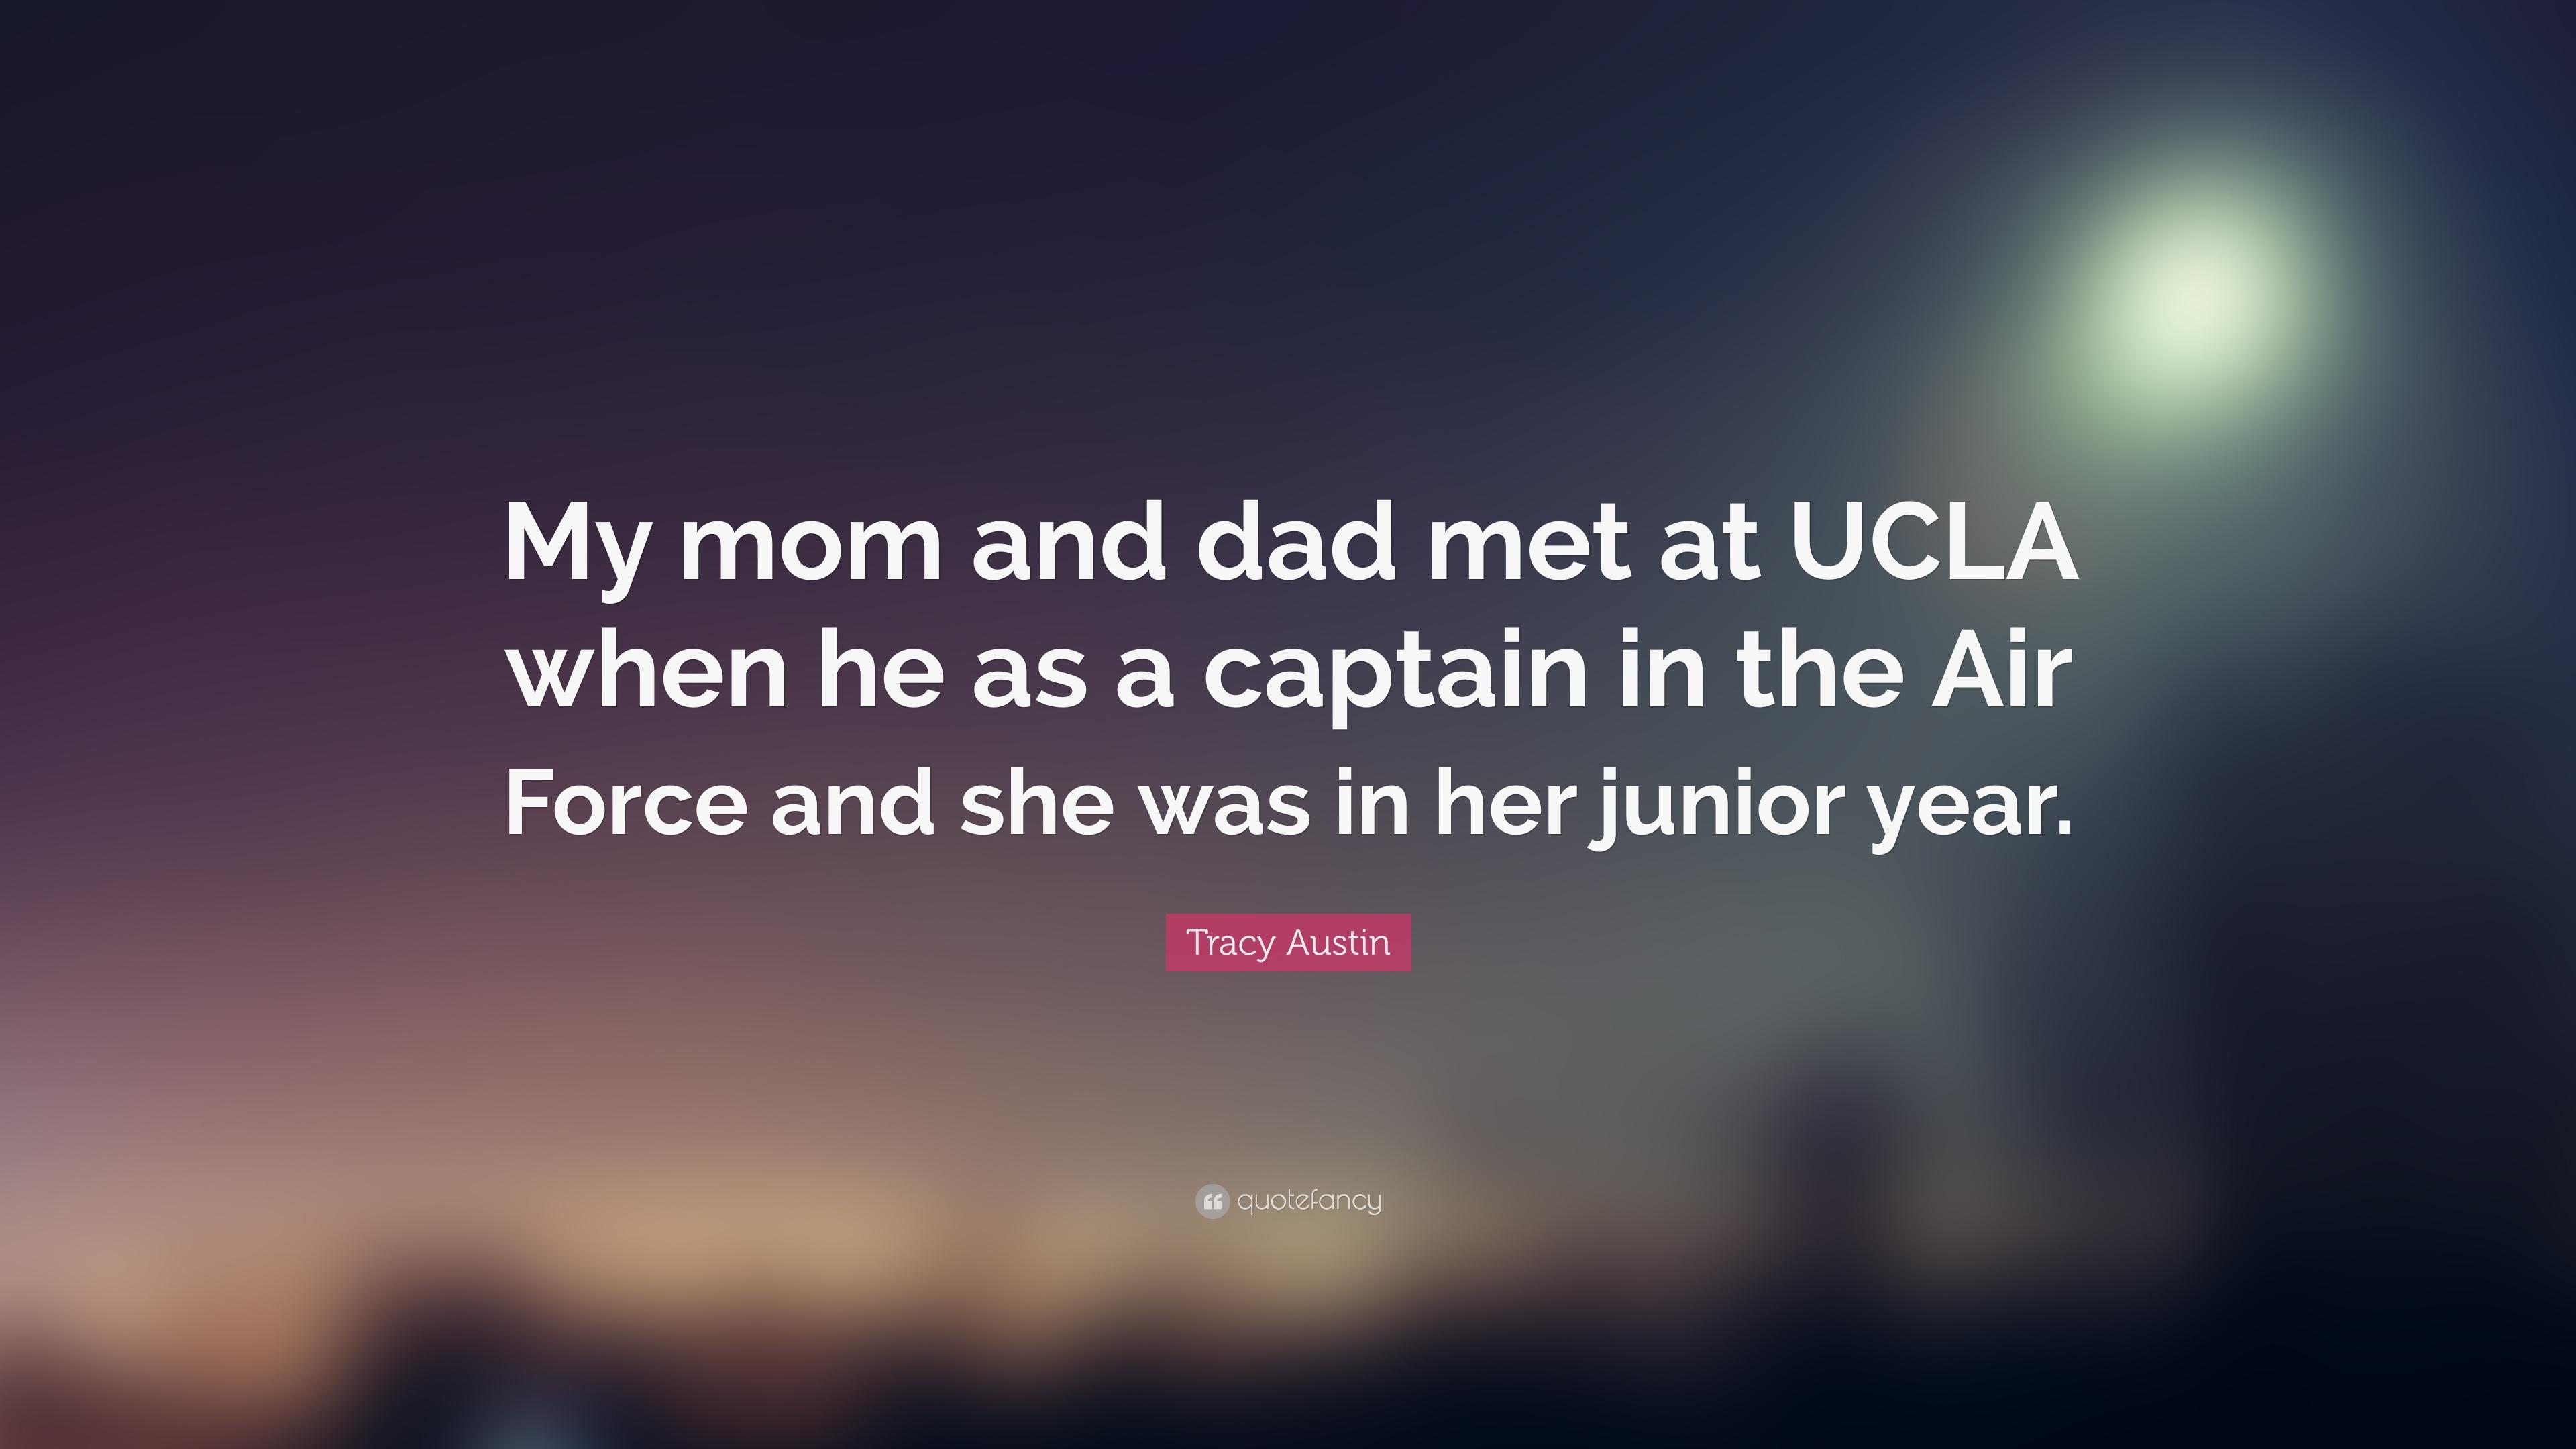 Tracy Austin Quote: “My mom and dad met at UCLA when he as a captain